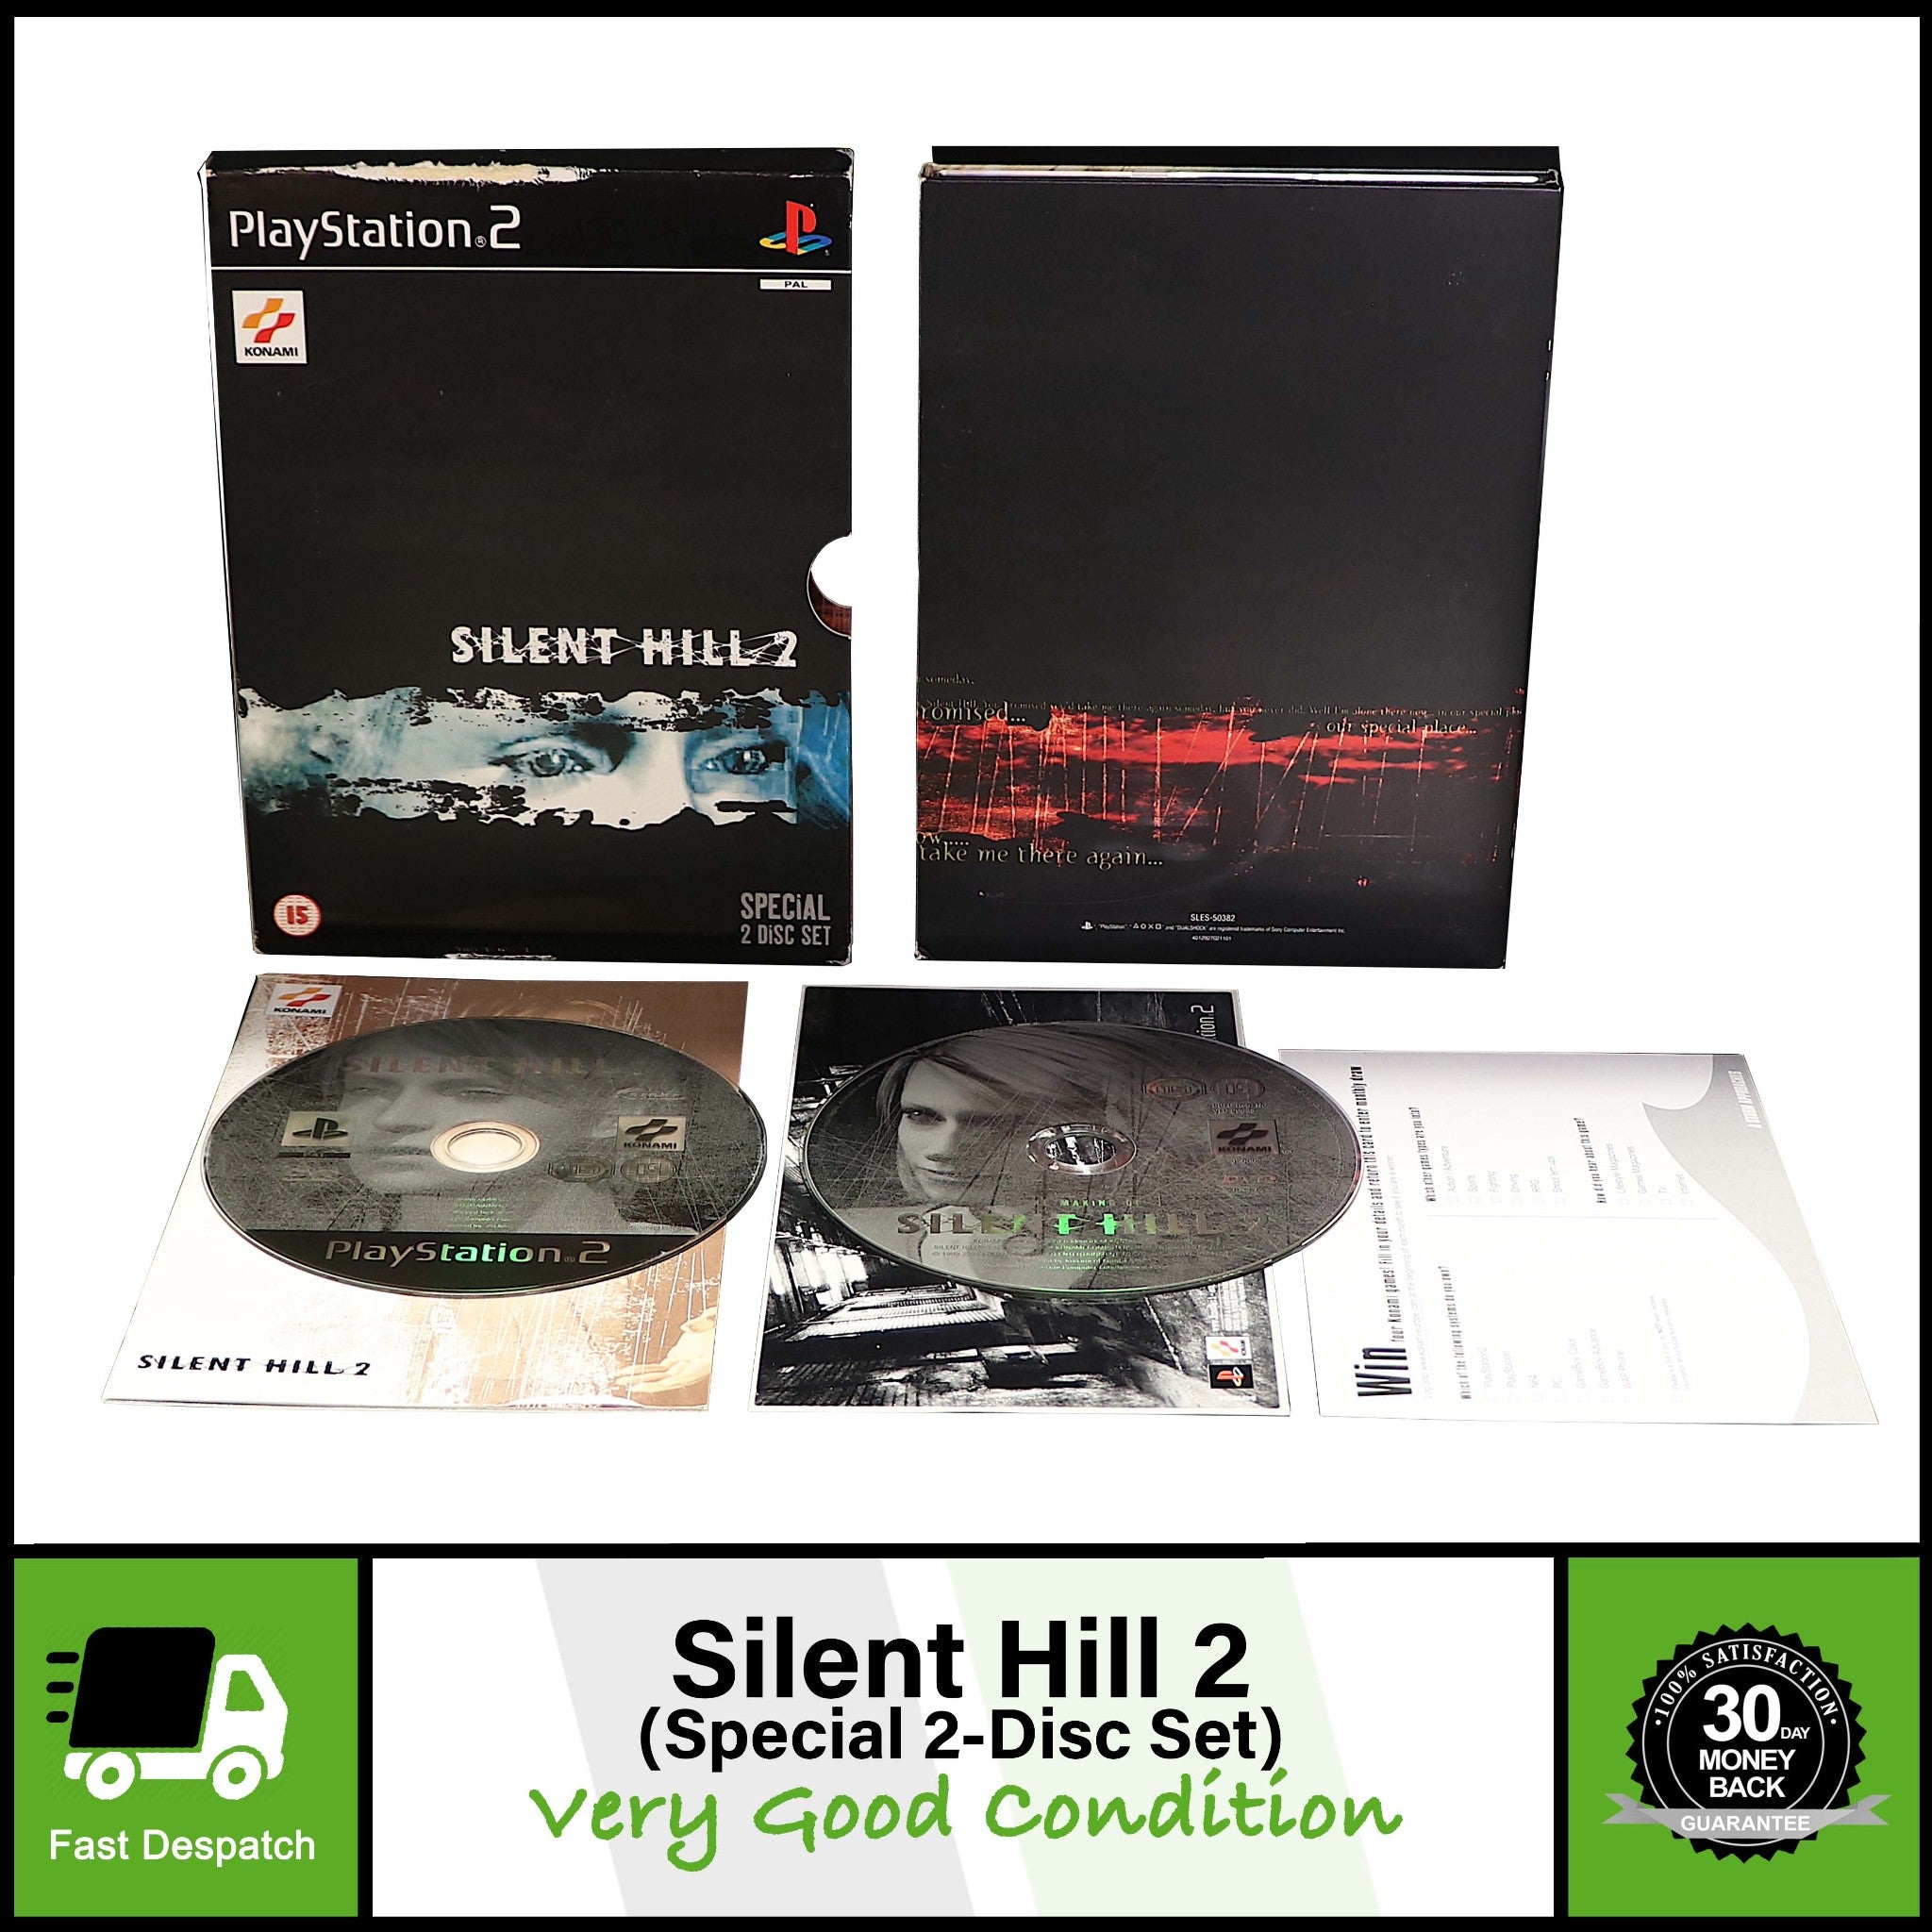 SILENT HILL  Sony Pictures Entertainment